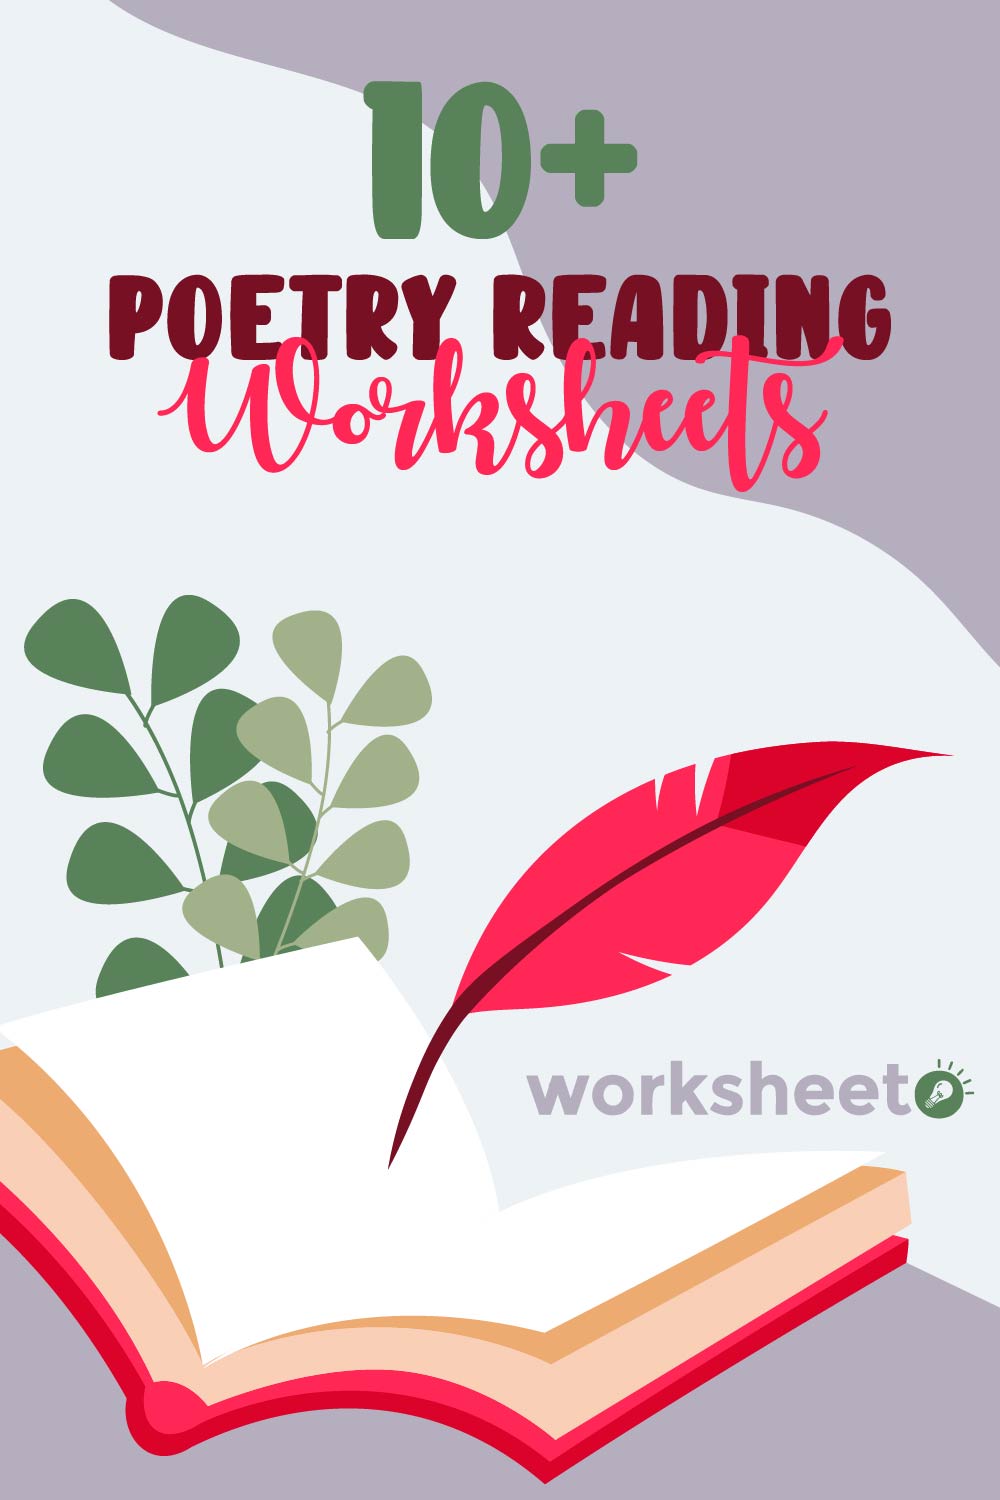 11 Images of Poetry Reading Worksheets